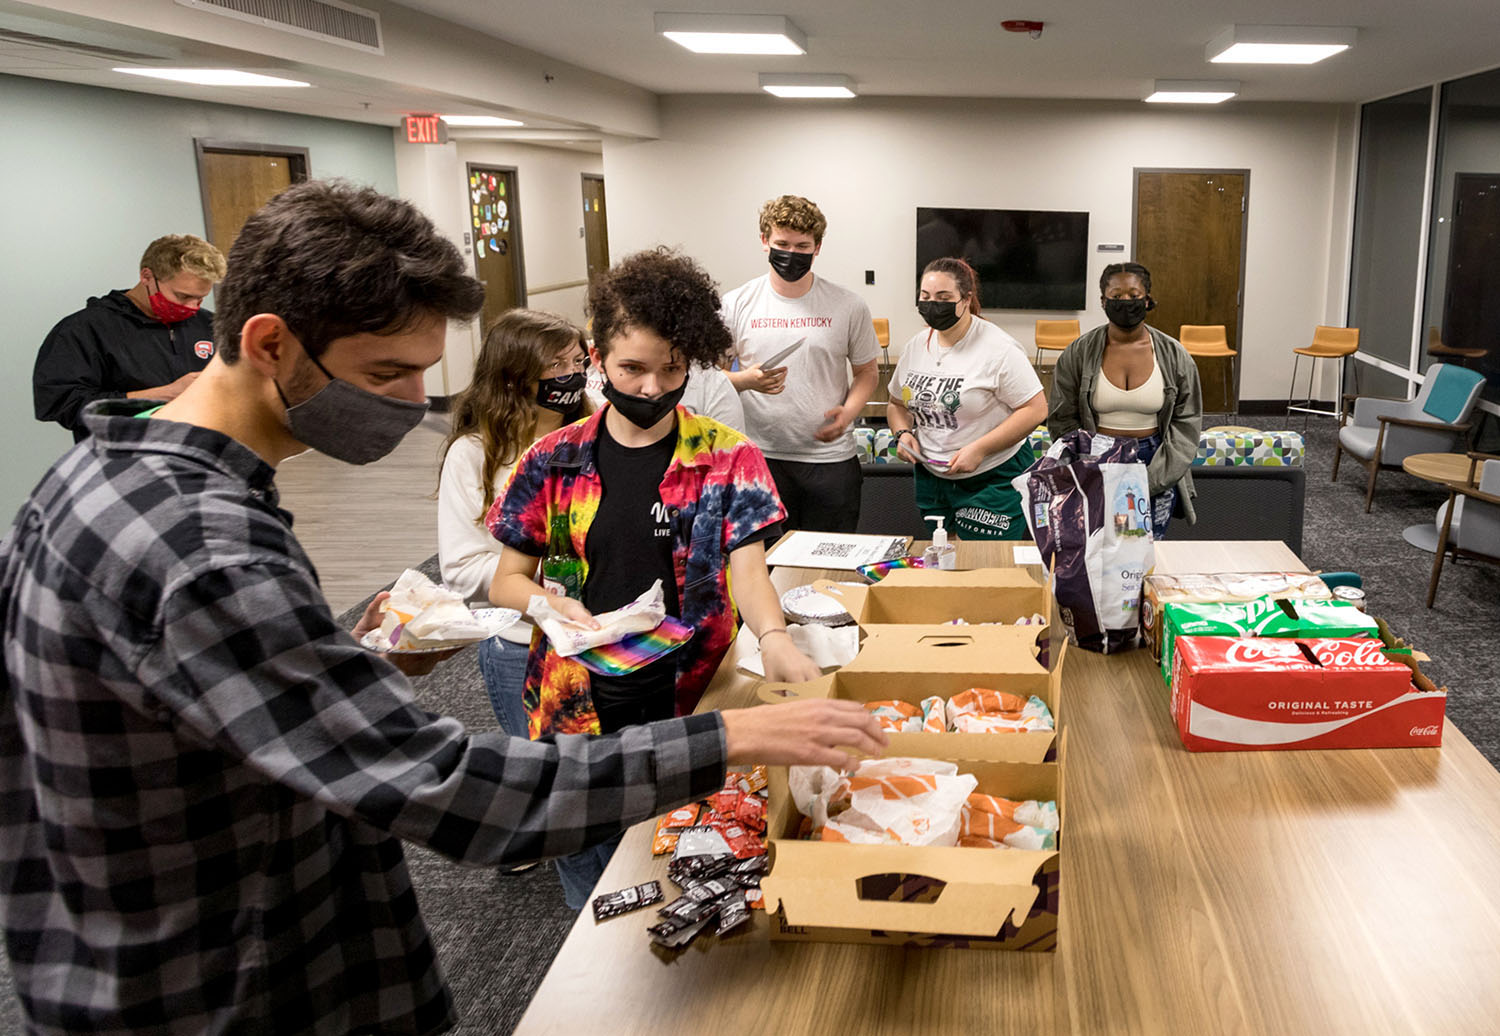 During the Let’s Taco Bout College event, LLC students had Taco Bell on their pod. In Normal Hall, each pod is home to about two dozen students and features a living room area for students to hang out, study, and hold gatherings.